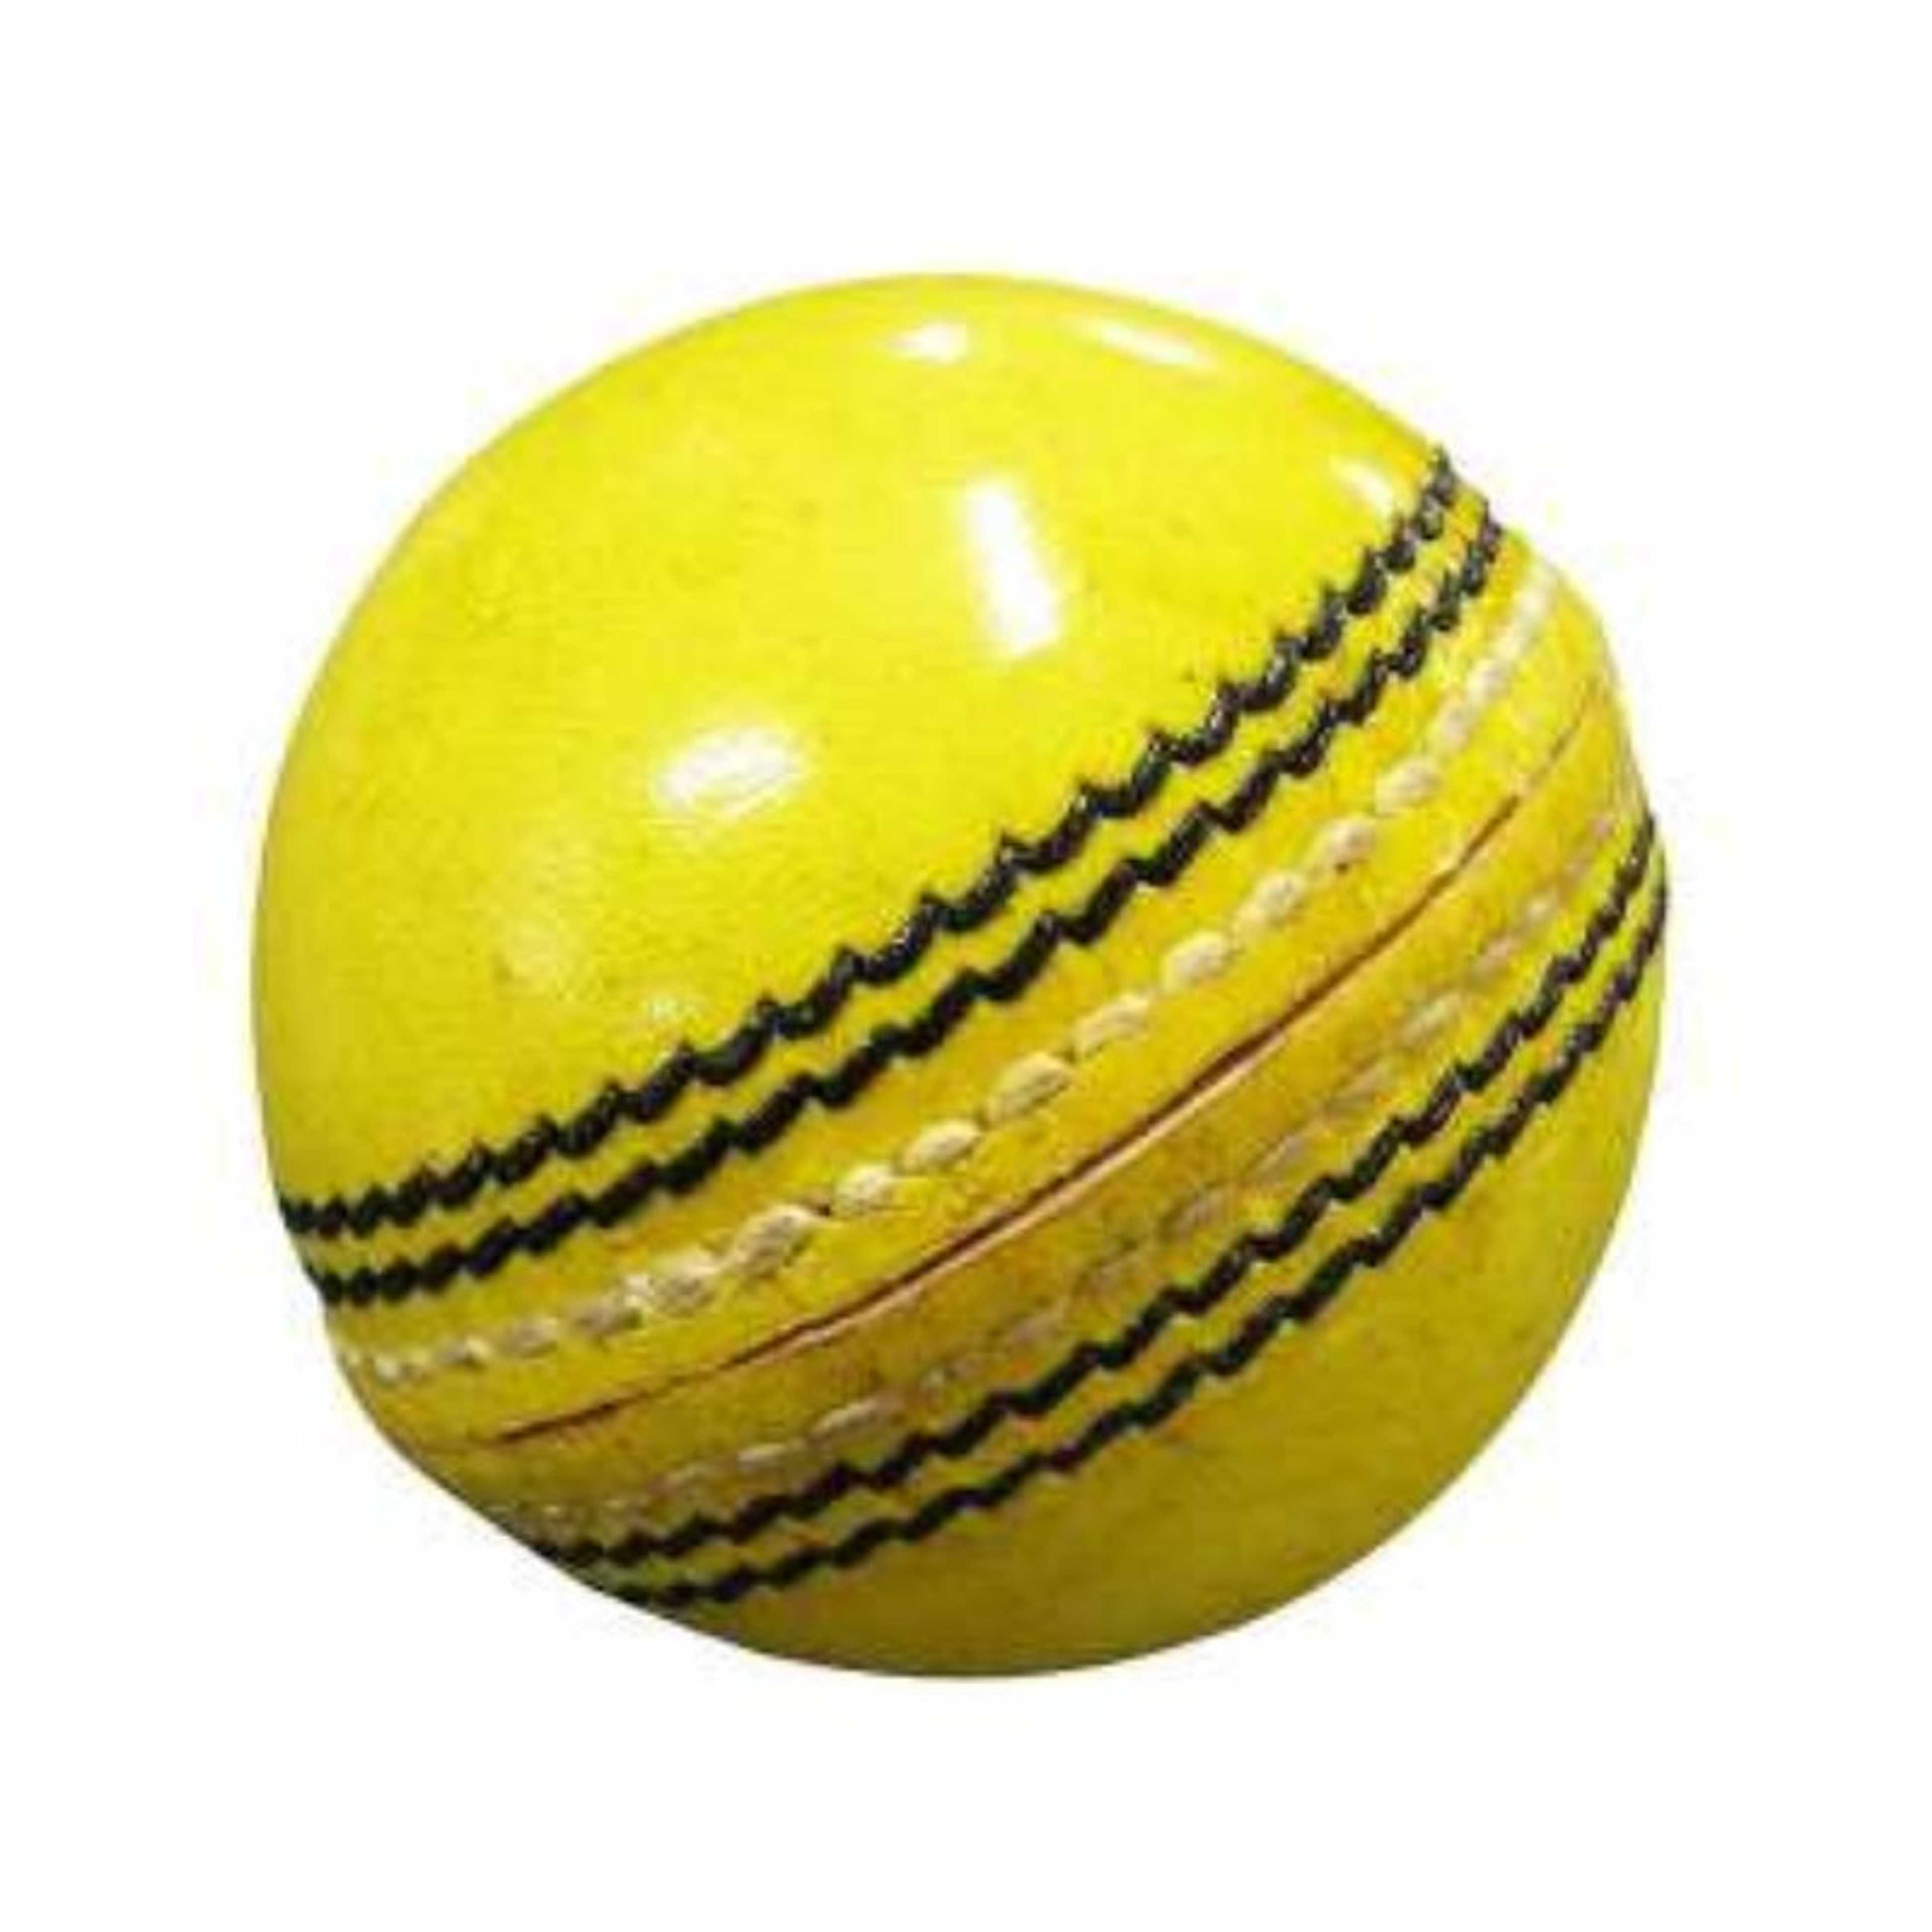 Pack of 6 - Indoor Rubber Cricket Ball - Yellow - 70gm